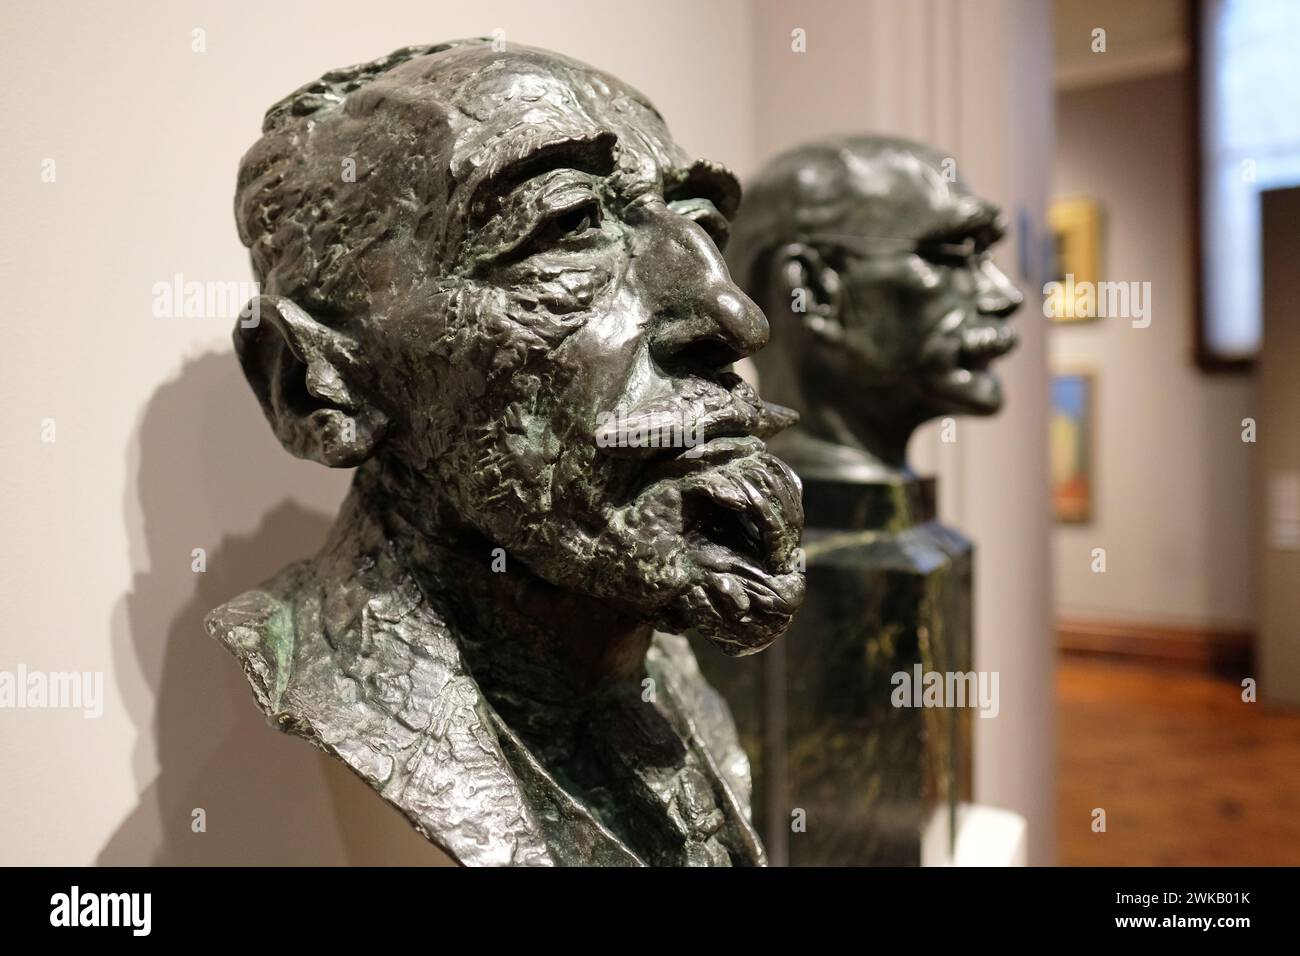 Bust of Joseph Conrad Polish British writer and novelist at the National Portrait Gallery London UK by sculptor Sir Jacob Epstein Stock Photo